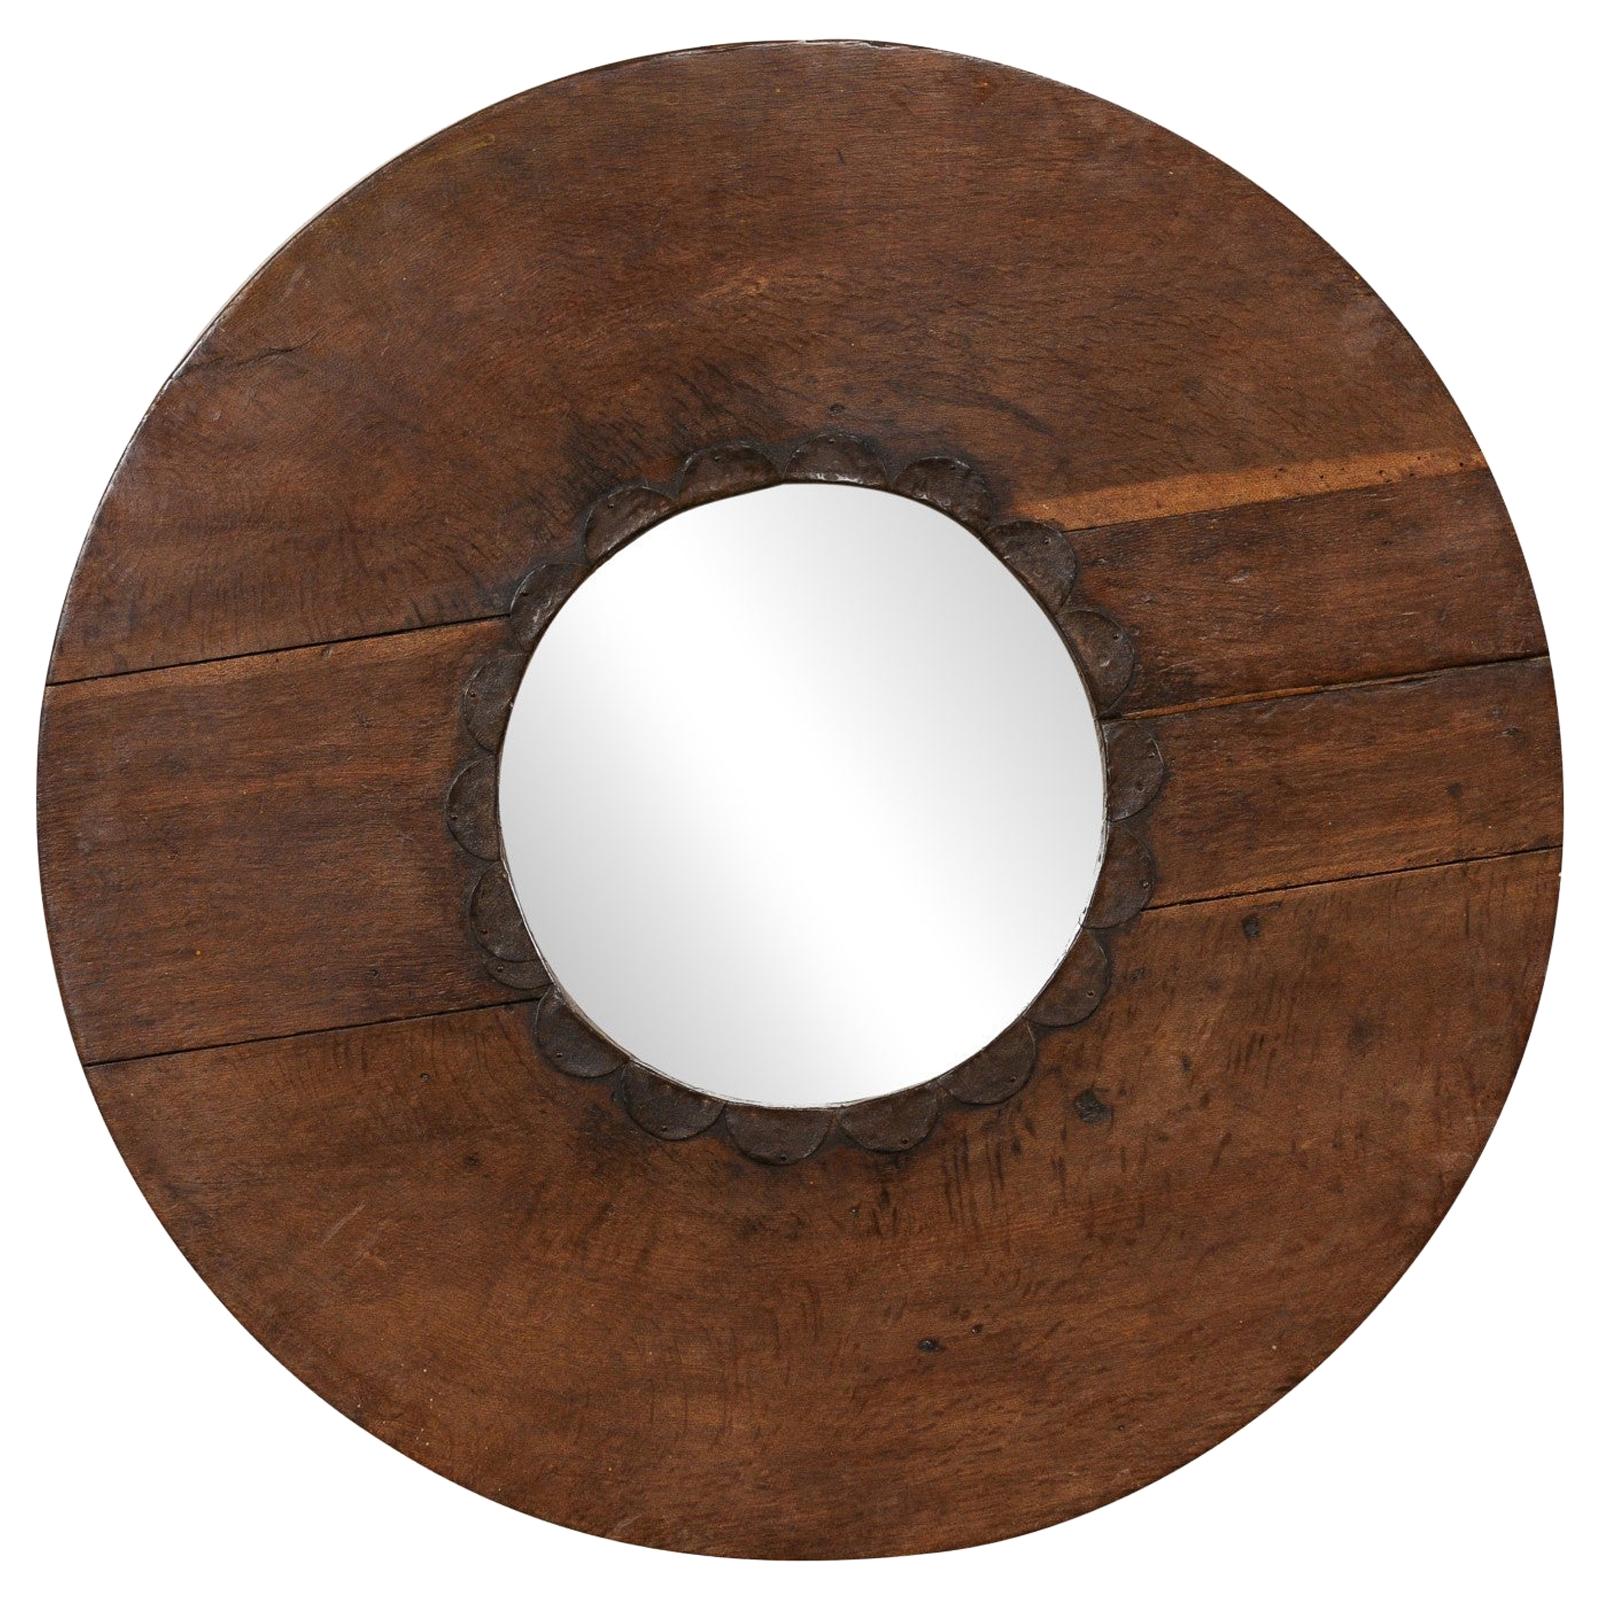 Unique Circular-Shaped Mirror from an Old Wooden N. African Cooking Utensil For Sale